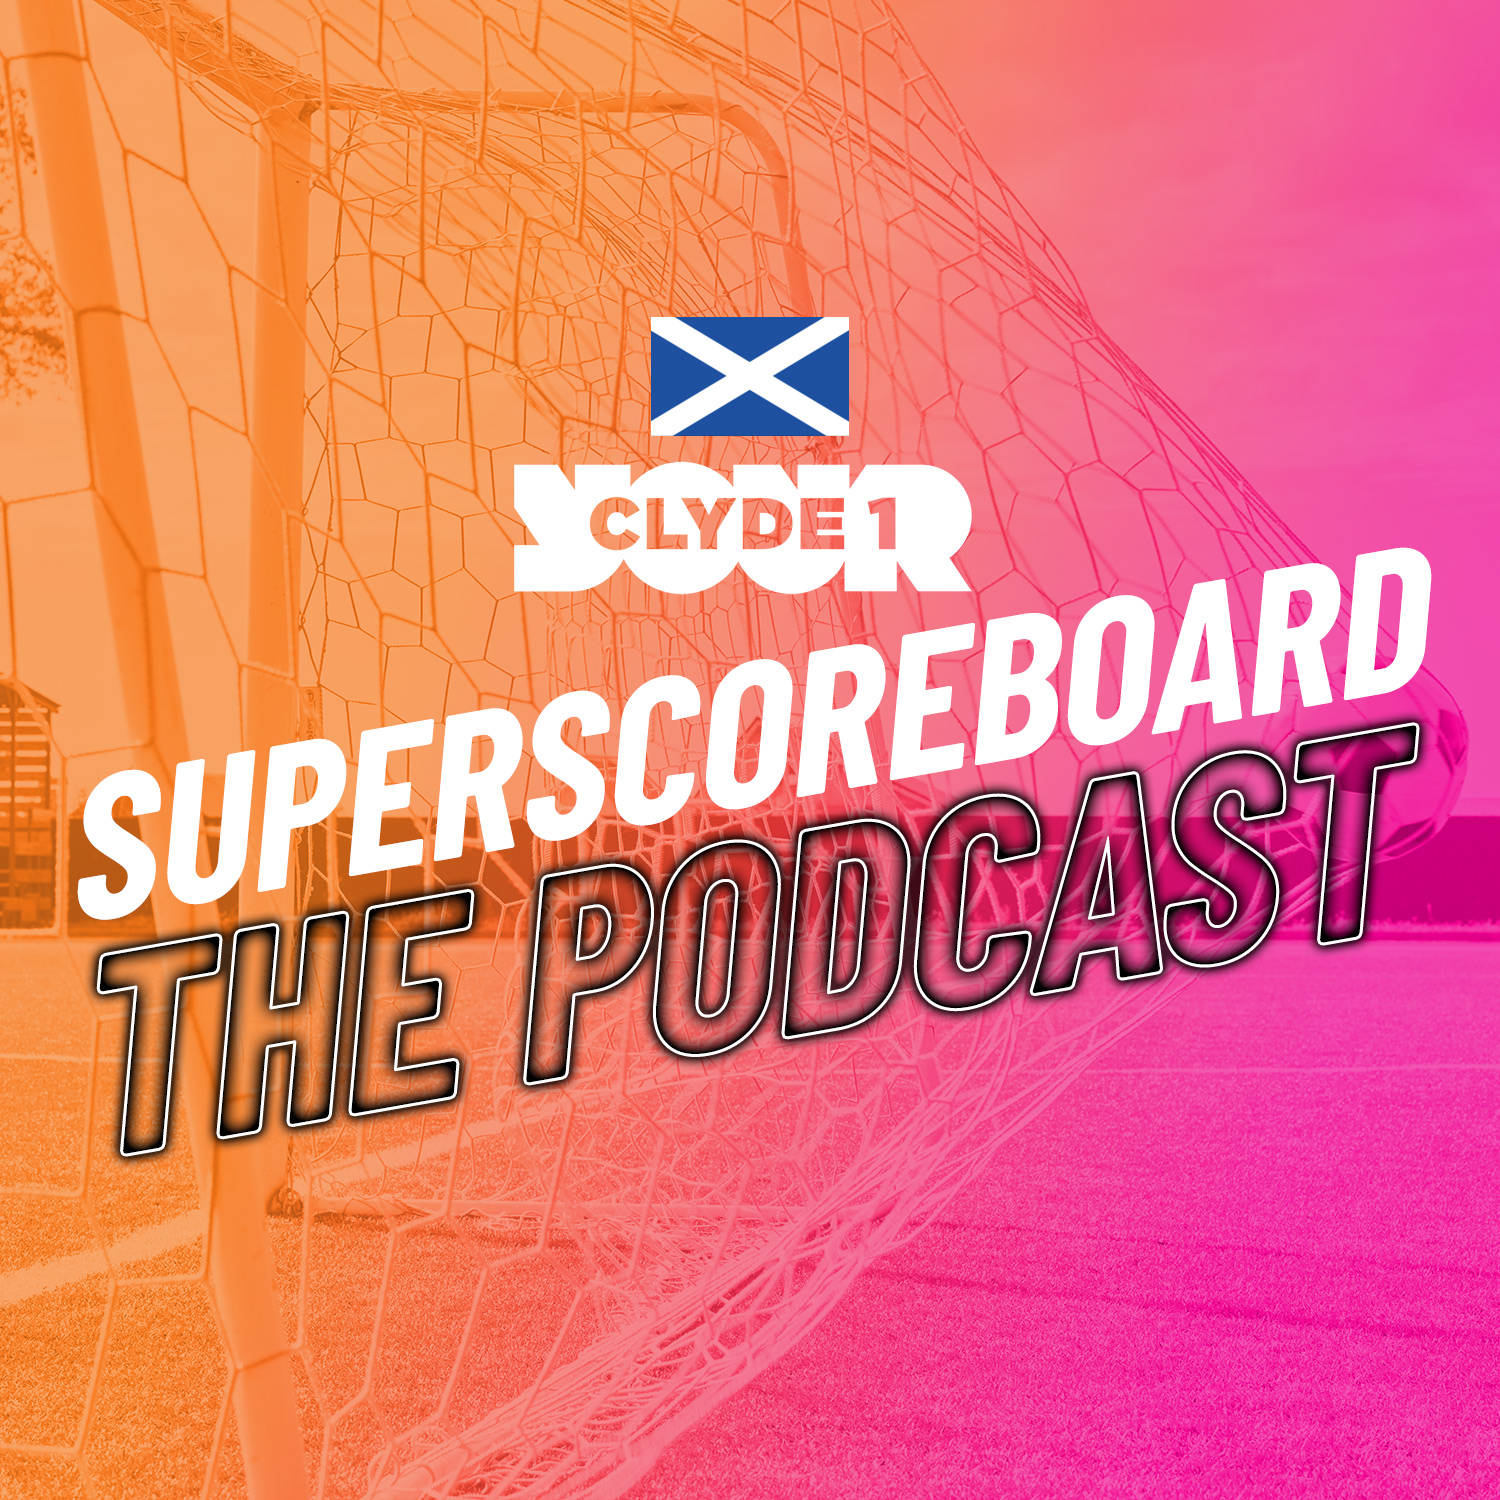 Wednesday 24th April Clyde 1 Superscoreboard